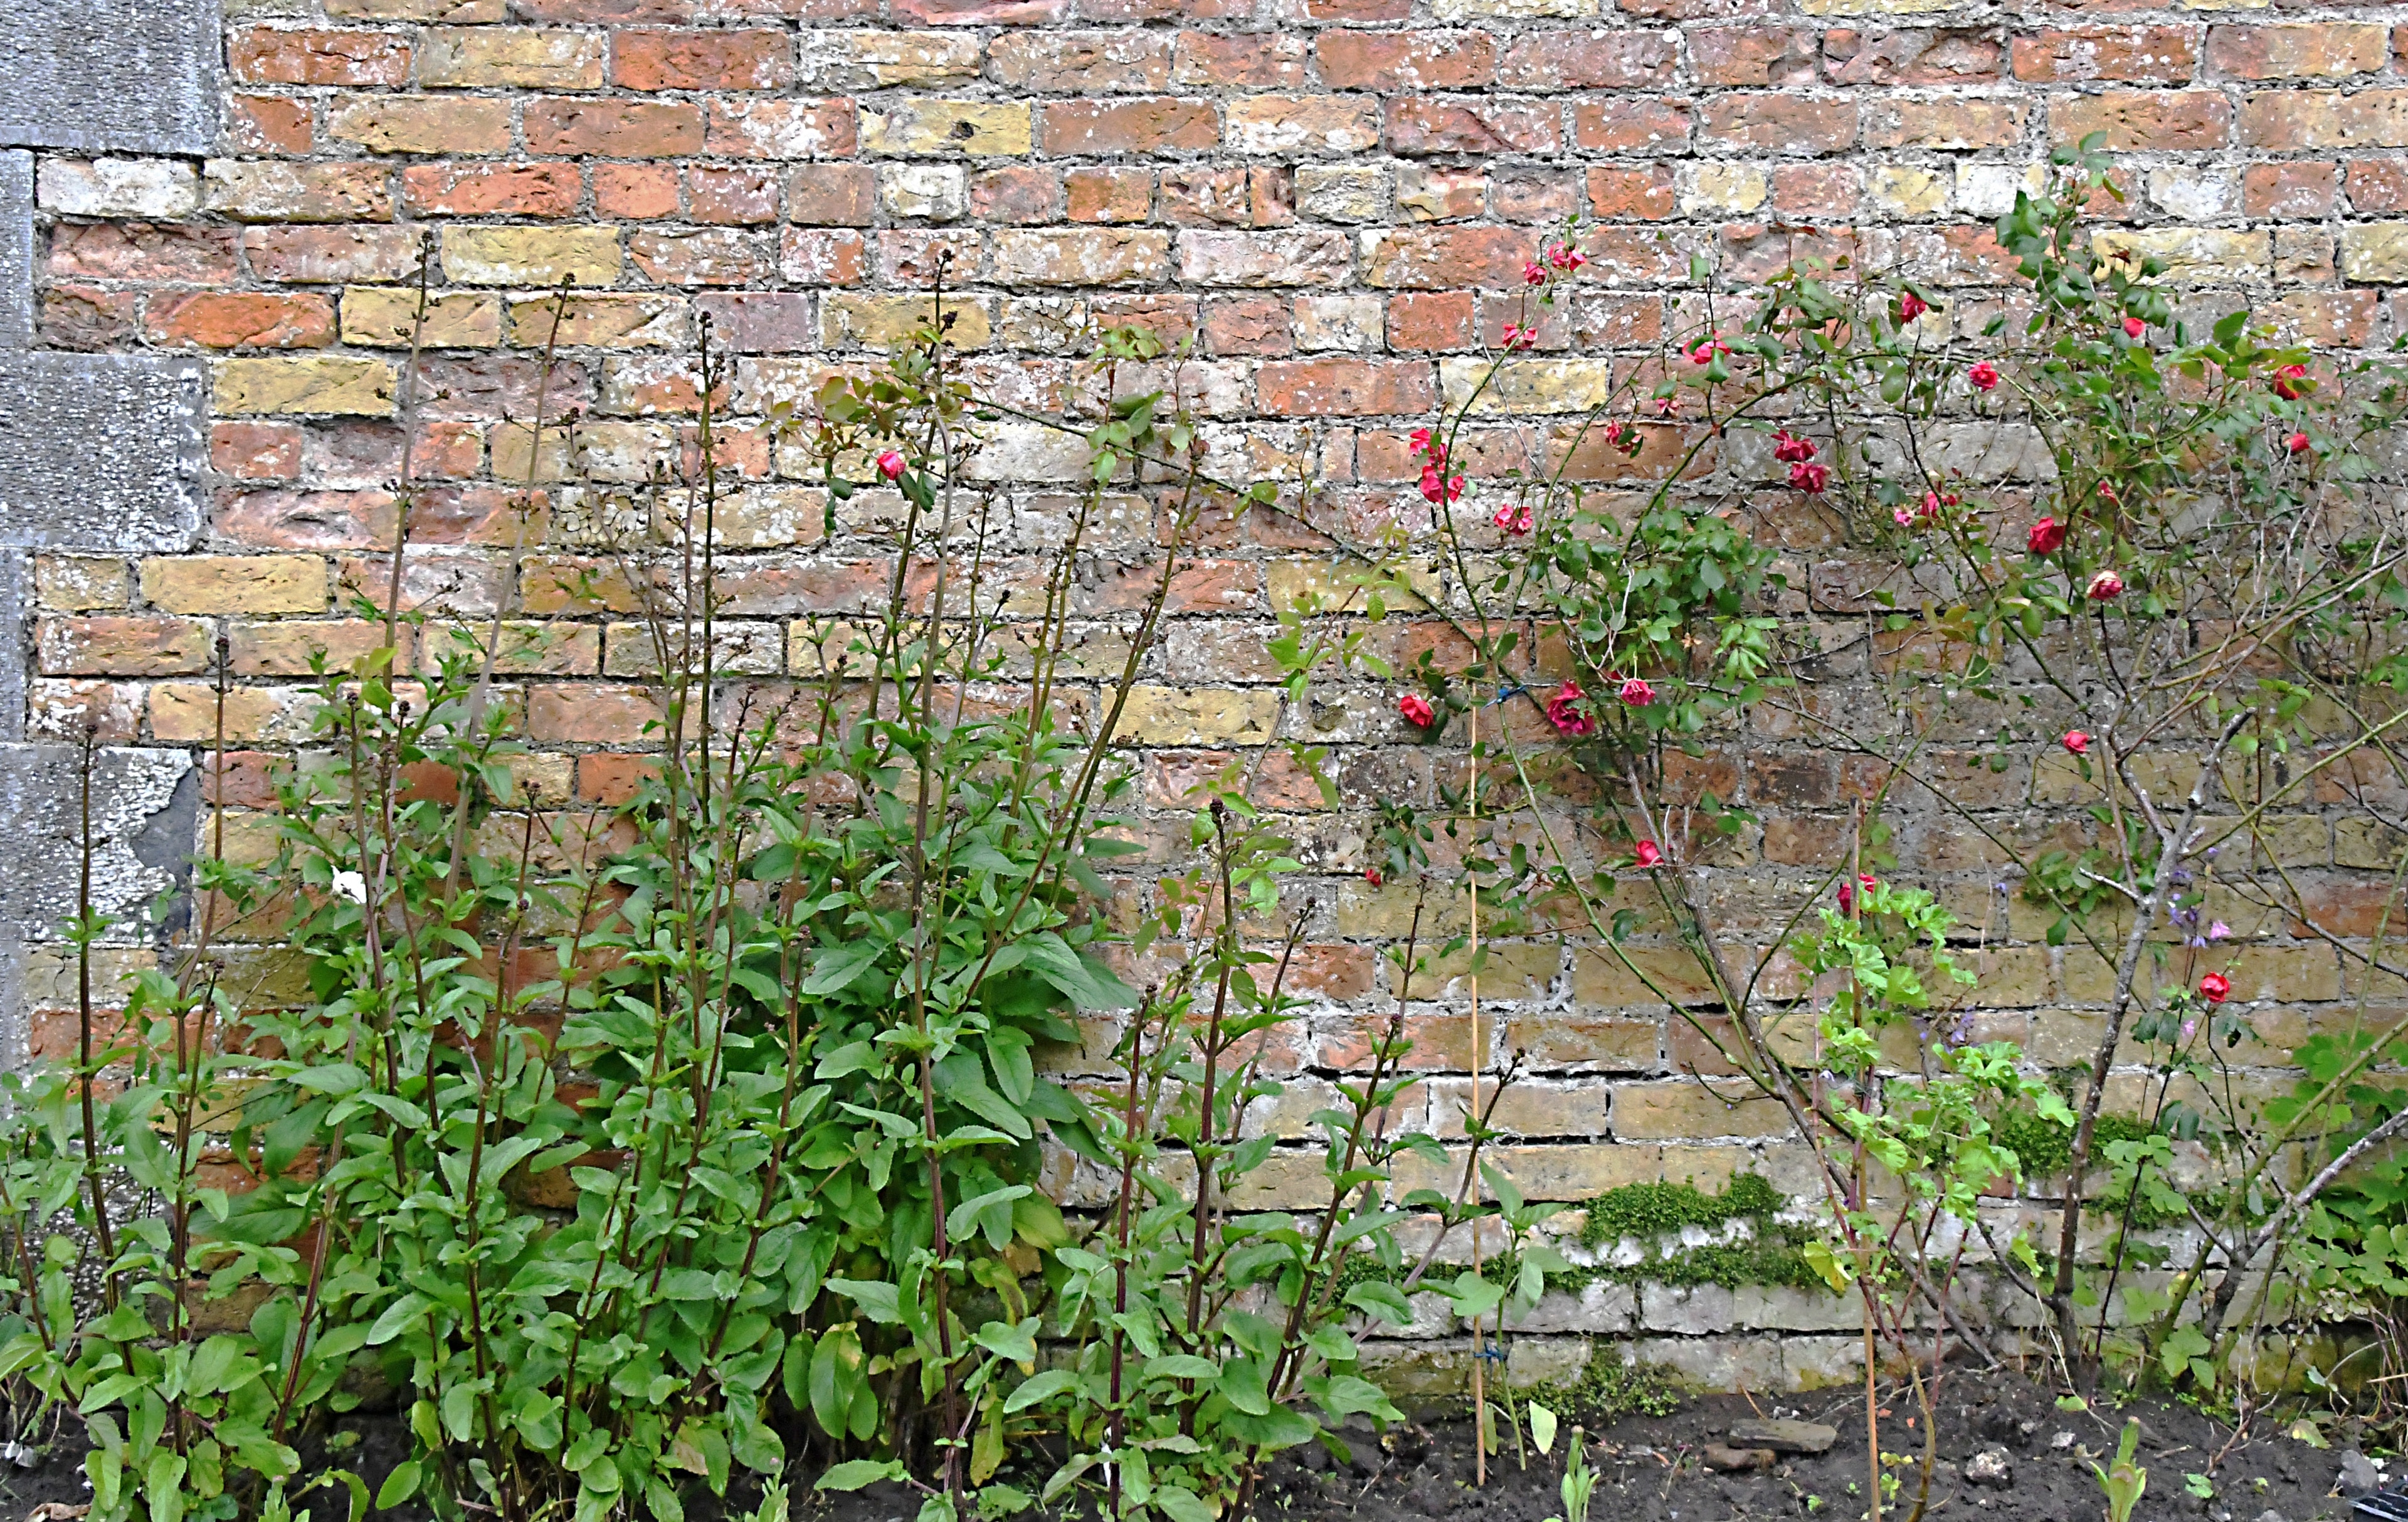 Part of the wall that surronds the kitchen garden.  Loved how the flowers contrasted with the brick.